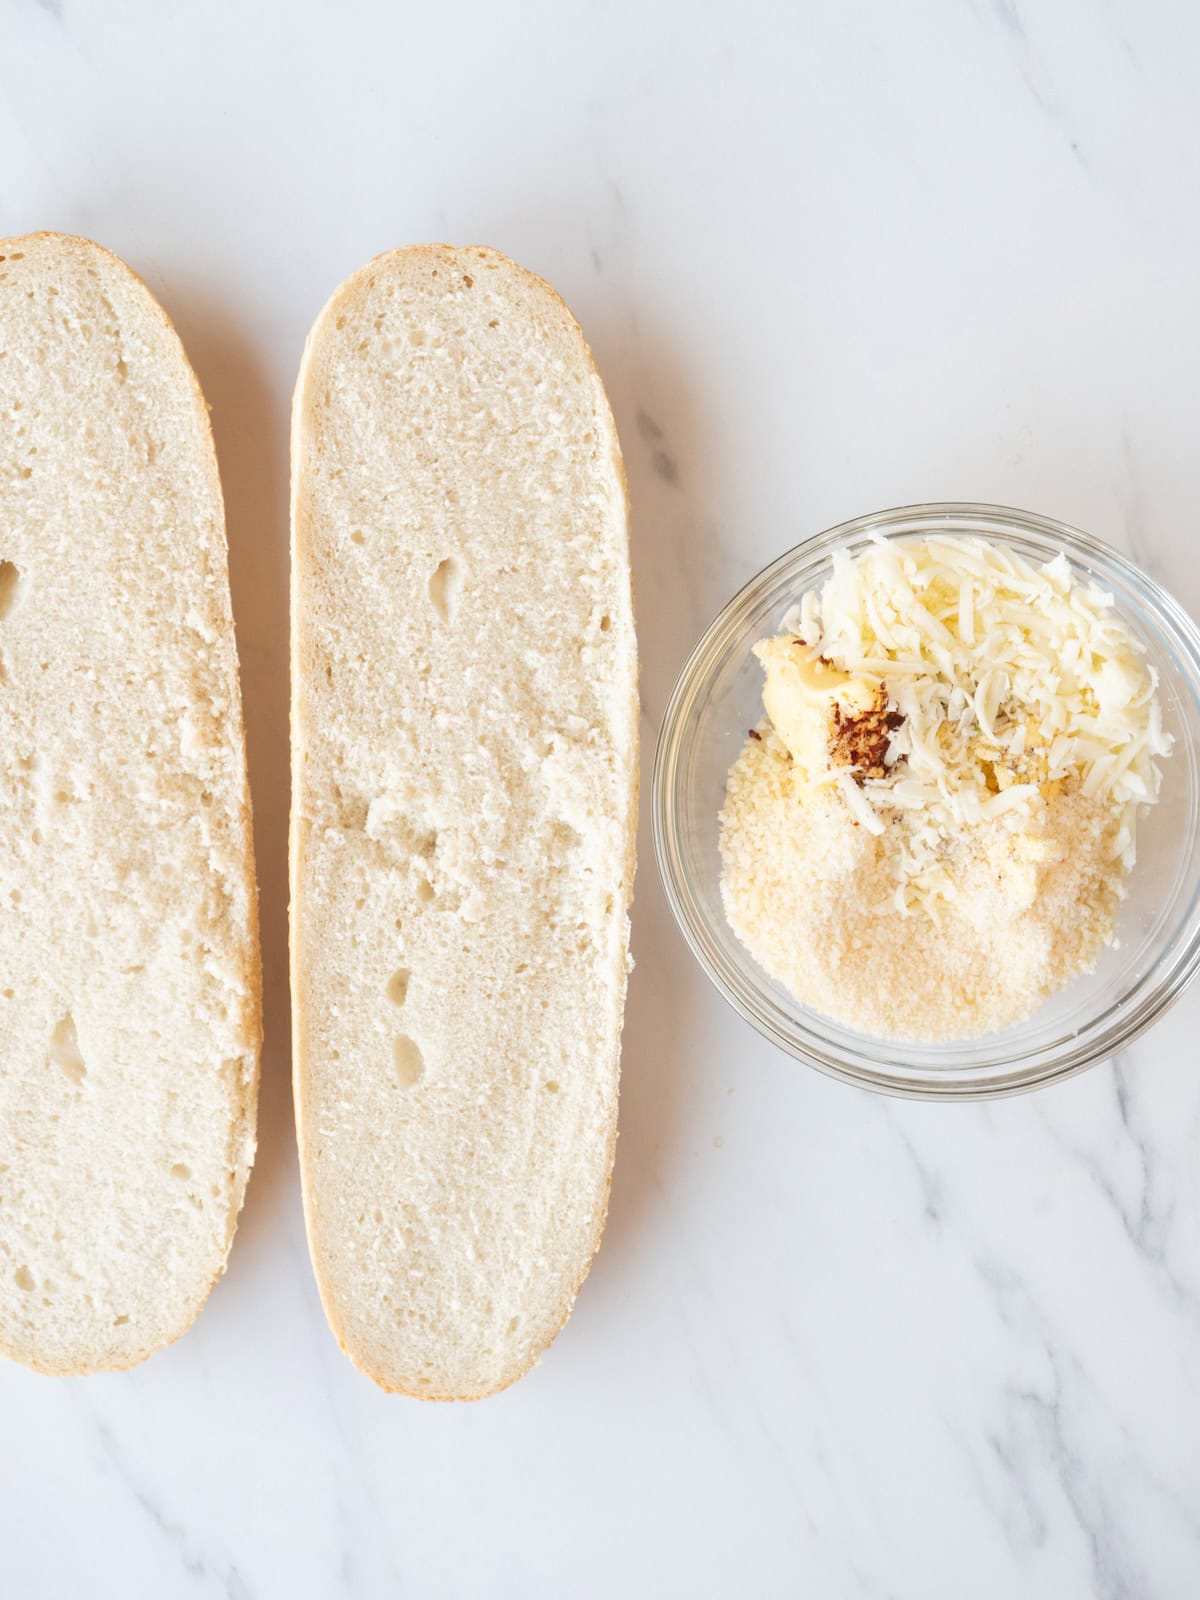 An italian or french bread loaf cut into two halves horizontally, along with a small glass mixing bowl of butter, chopped garlic, red pepper flakes, shredded mozzarella, parmesan, salt and pepper.